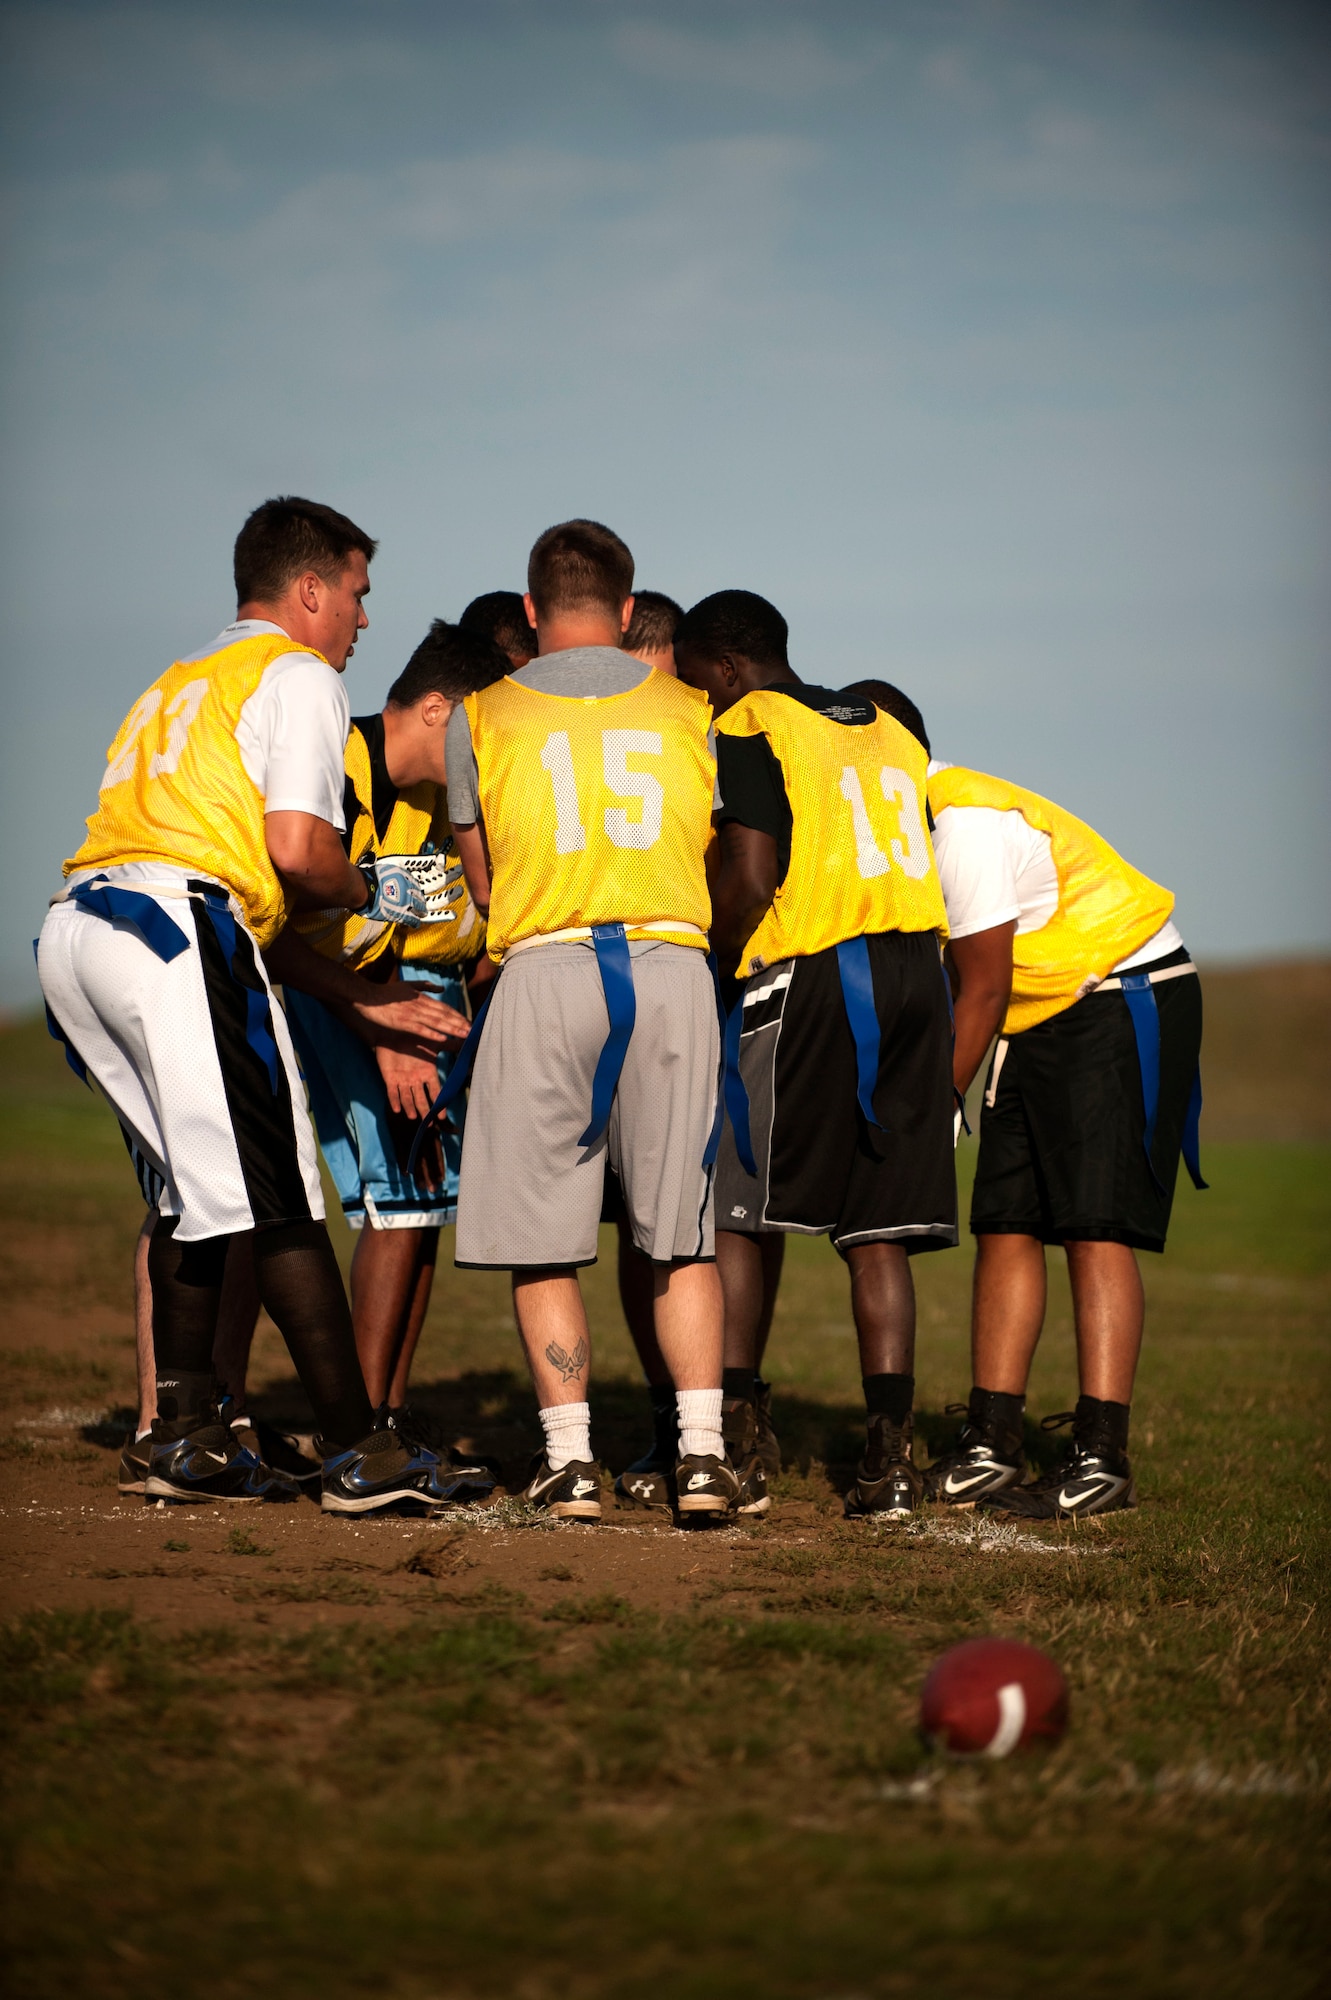 SPANGDAHLEM AIR BASE, Germany – Members of the 52nd Aircraft Maintenance Squadron huddle up during a flag football game near the Skelton Memorial Fitness Center here Sept. 5.  The 52nd AMXS went on to win their first game of the season against the 52nd Logistics Readiness Squadron with a final score of 25-20.  The flag football season will continue until Oct. 31, thereafter the top eight teams will compete for the base championship title in a single elimination tournament. (U.S. Air Force photo by Airman 1st Class Gustavo Castillo/Released)